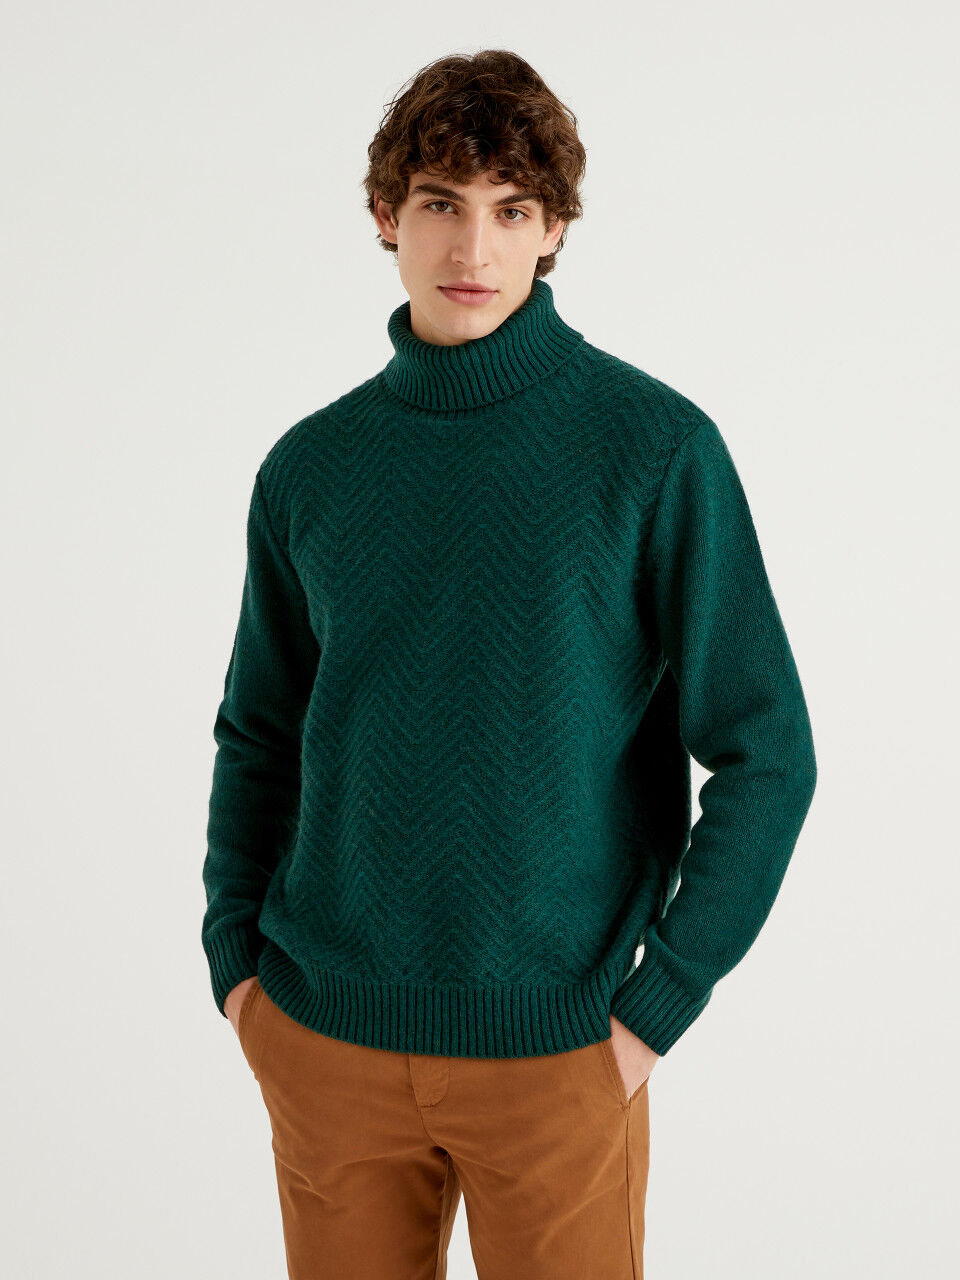 Tejido a mano LANA MOHAIR Pullover Hombres Suéter Cuello tortuga suave y grueso Jersey Ropa Ropa para hombre Jerséis Jerséis 